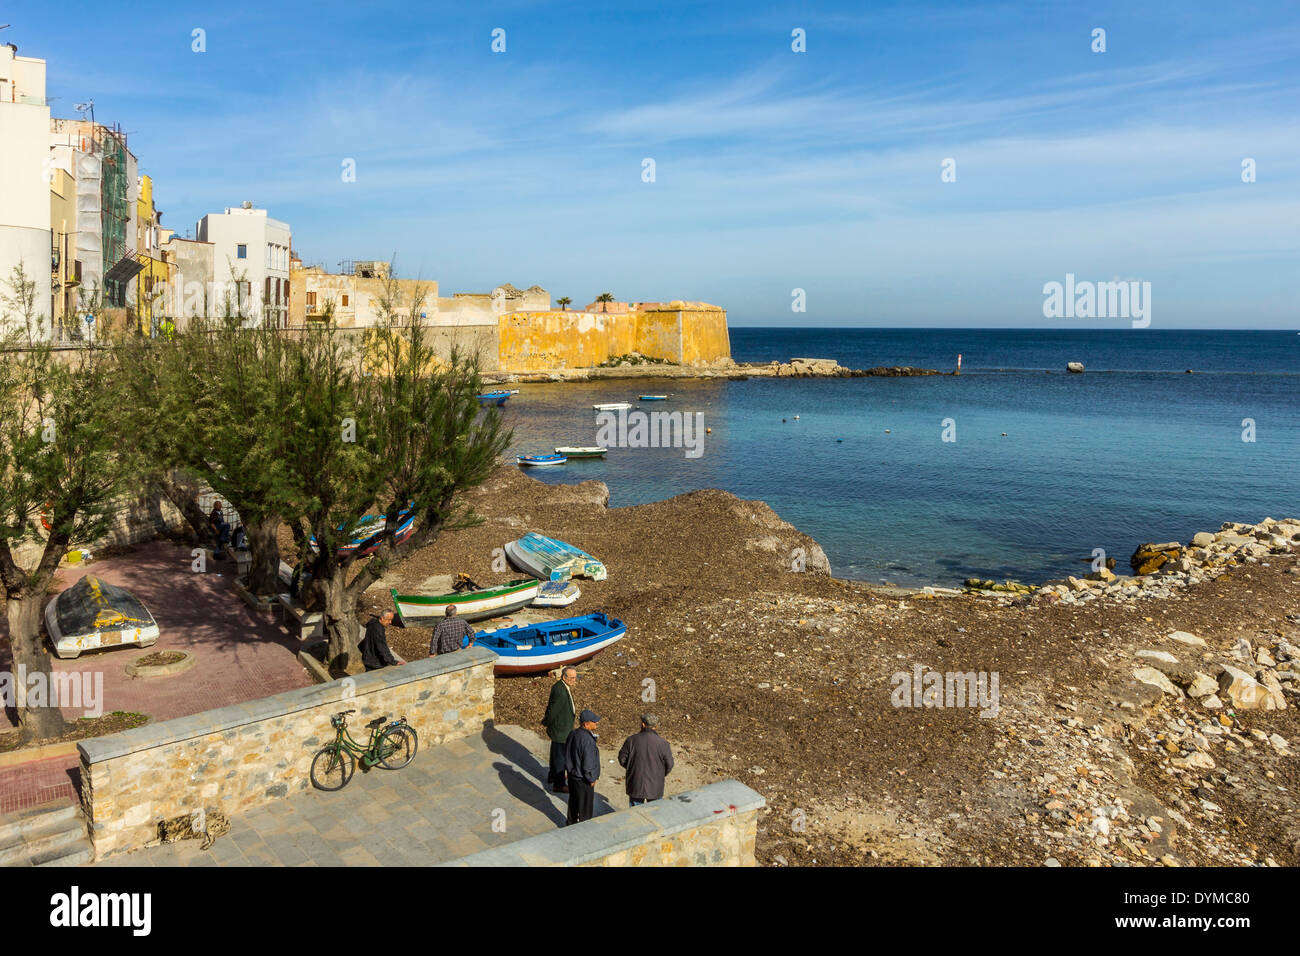 Protected cove & city walls seen from Via Mura Di Tramontana Ovest on sea front of this NW fishing port; Trapani, Sicily, Italy Stock Photo